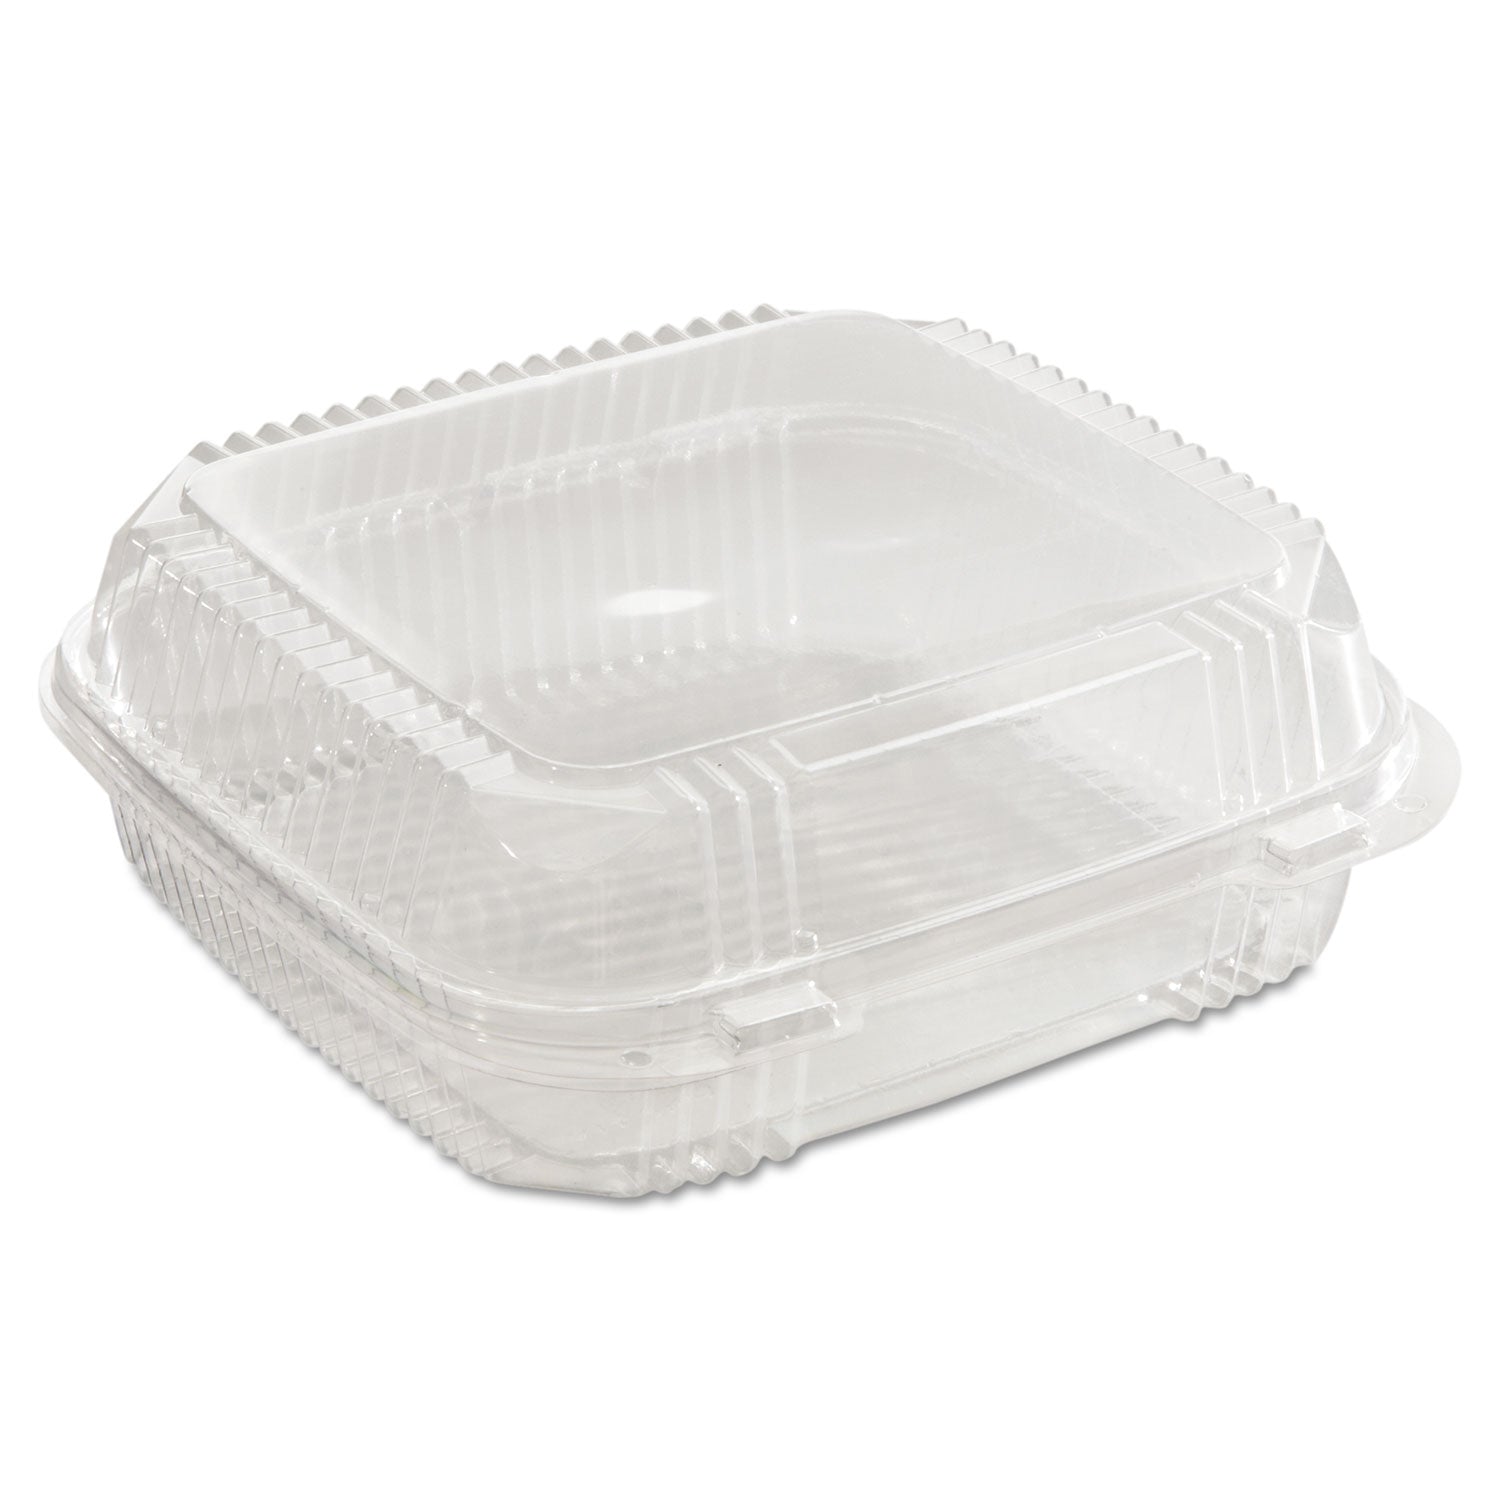 clearview-smartlock-hinged-lid-container-49-oz-82-x-834-x-291-clear-plastic-200-carton_pctyci81120 - 2